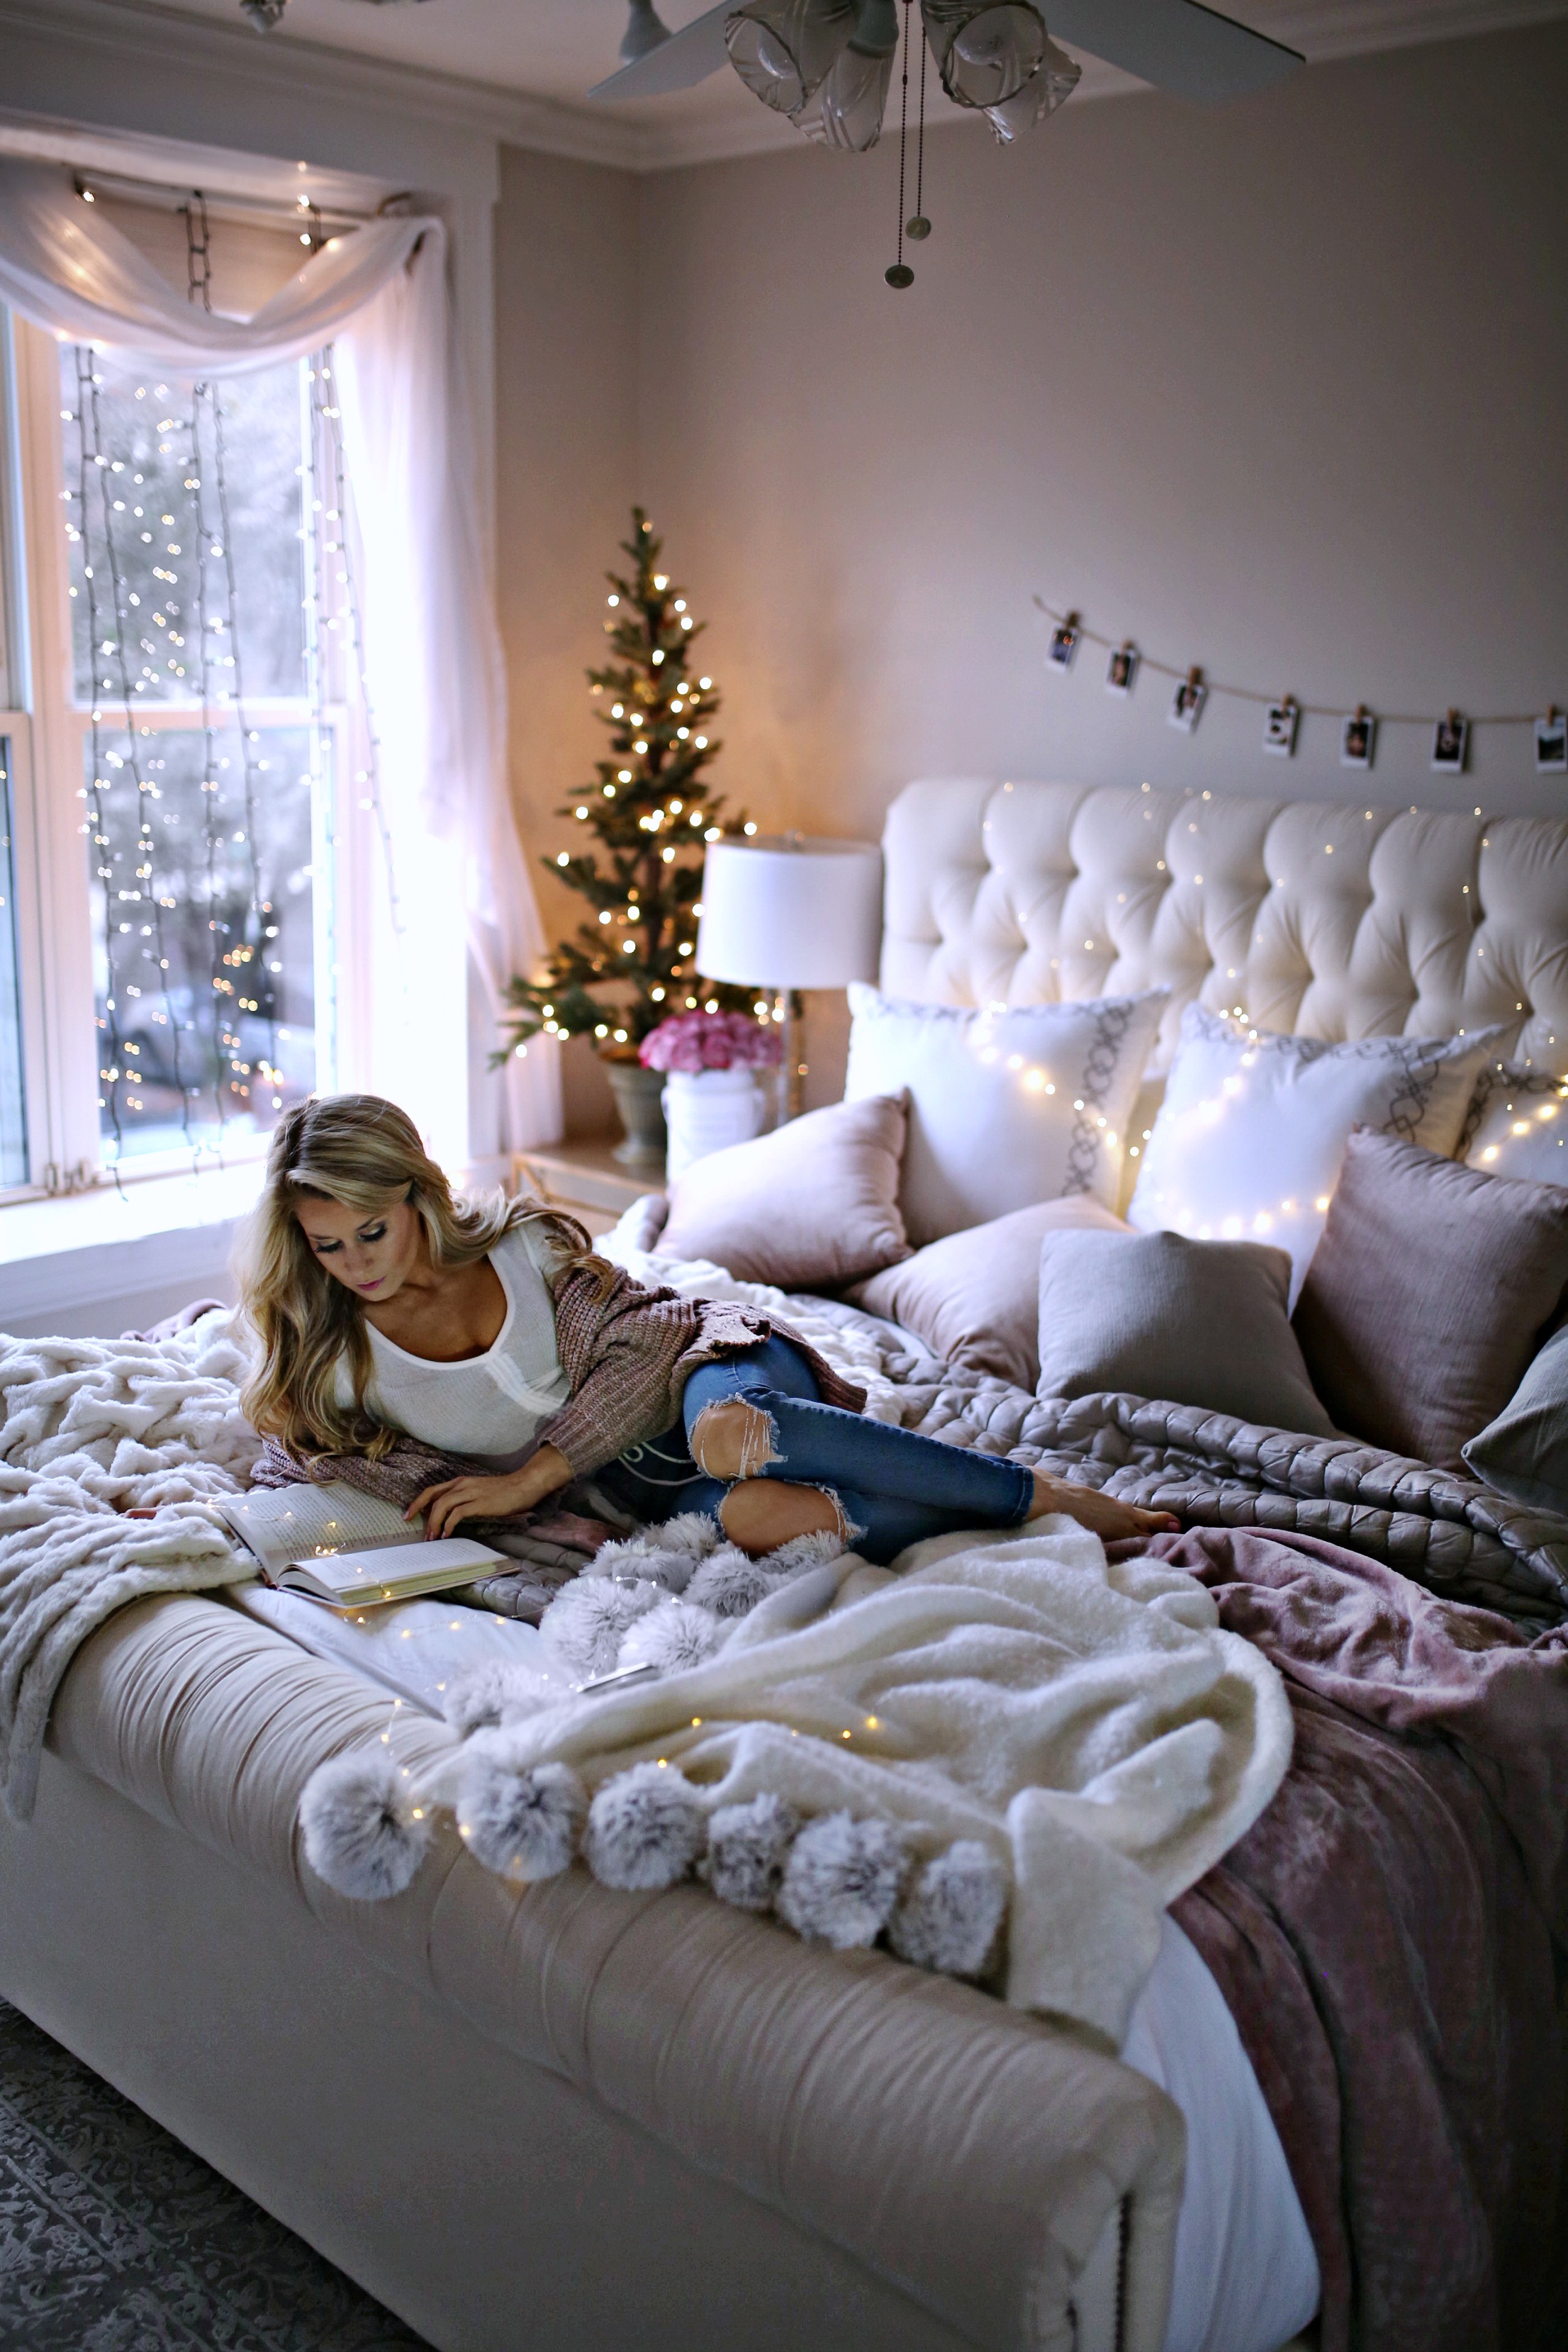 7 Holiday Decor Ideas for Your Bedroom to Olivia